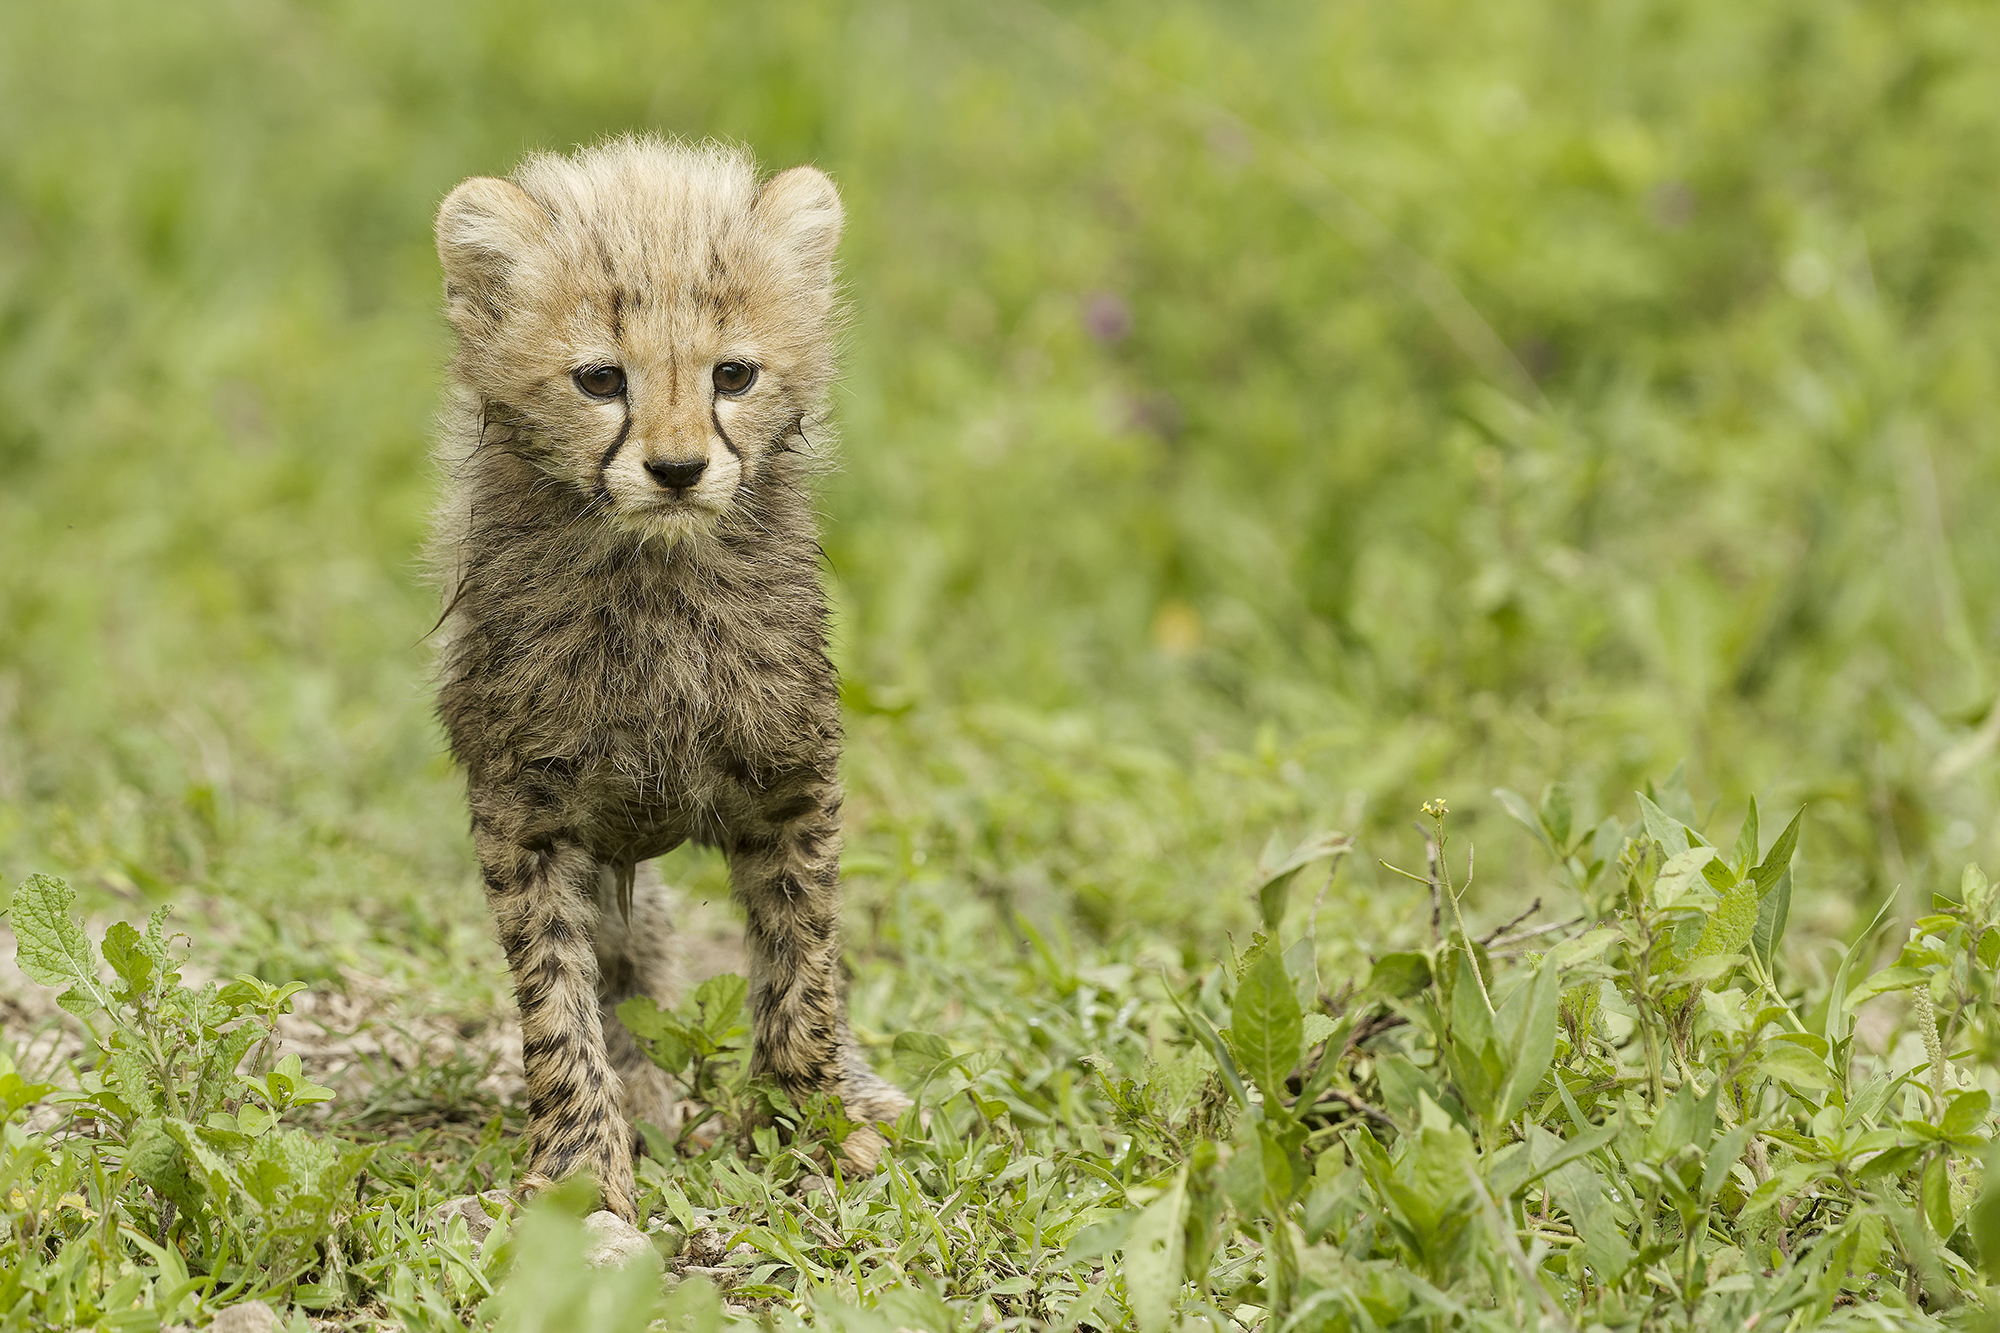 but when cheetah cubs are beautiful...